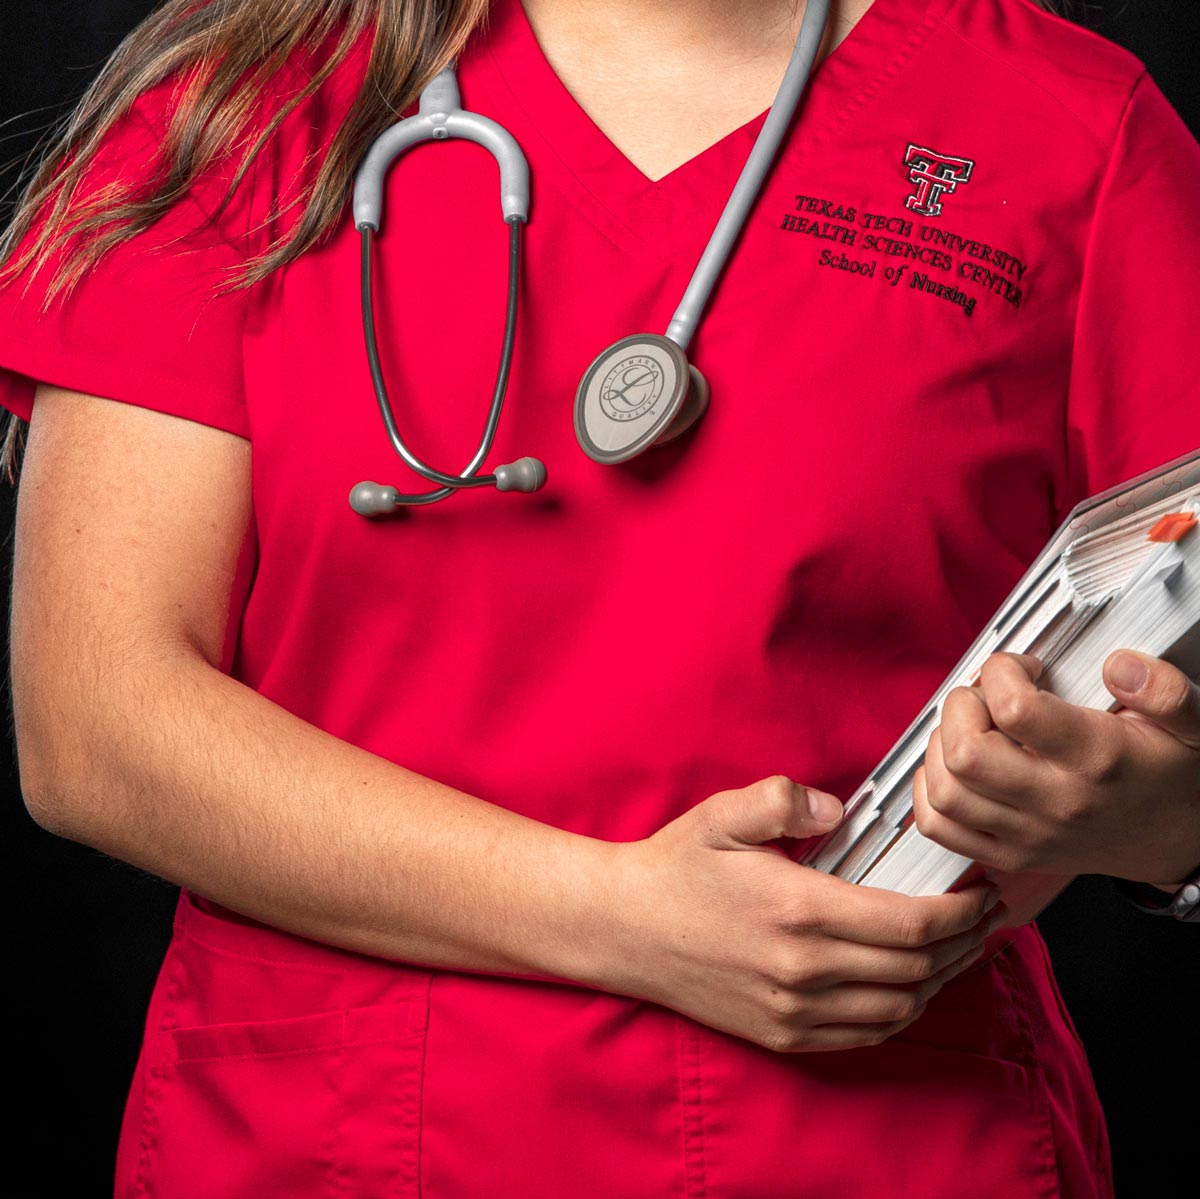 First class nurse holding papers